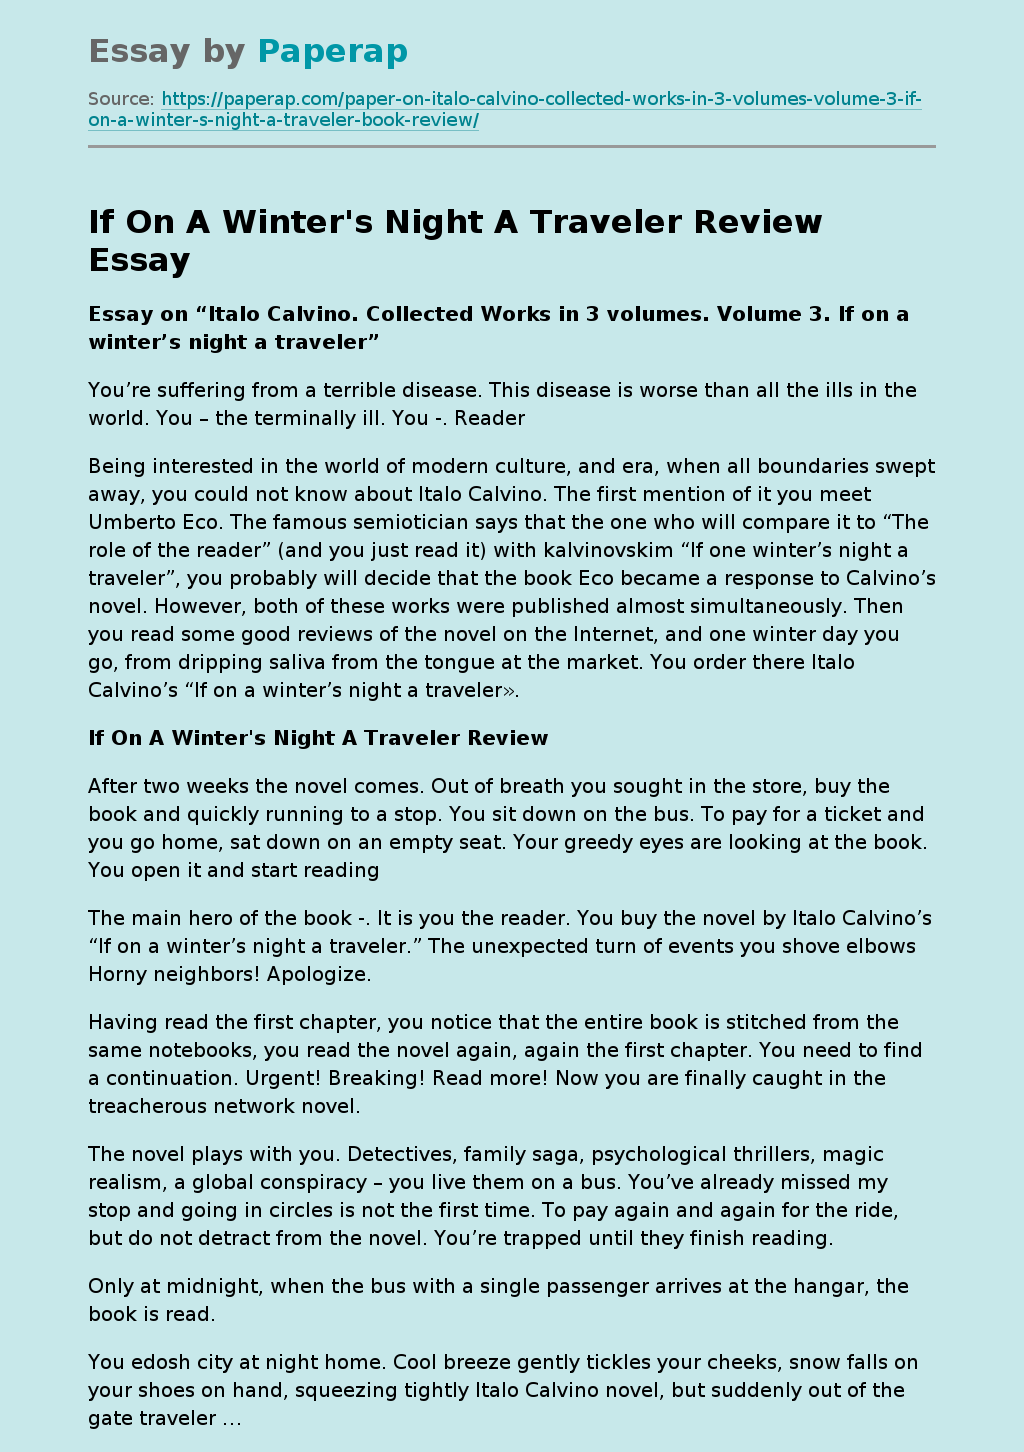 If On A Winter's Night A Traveler Review